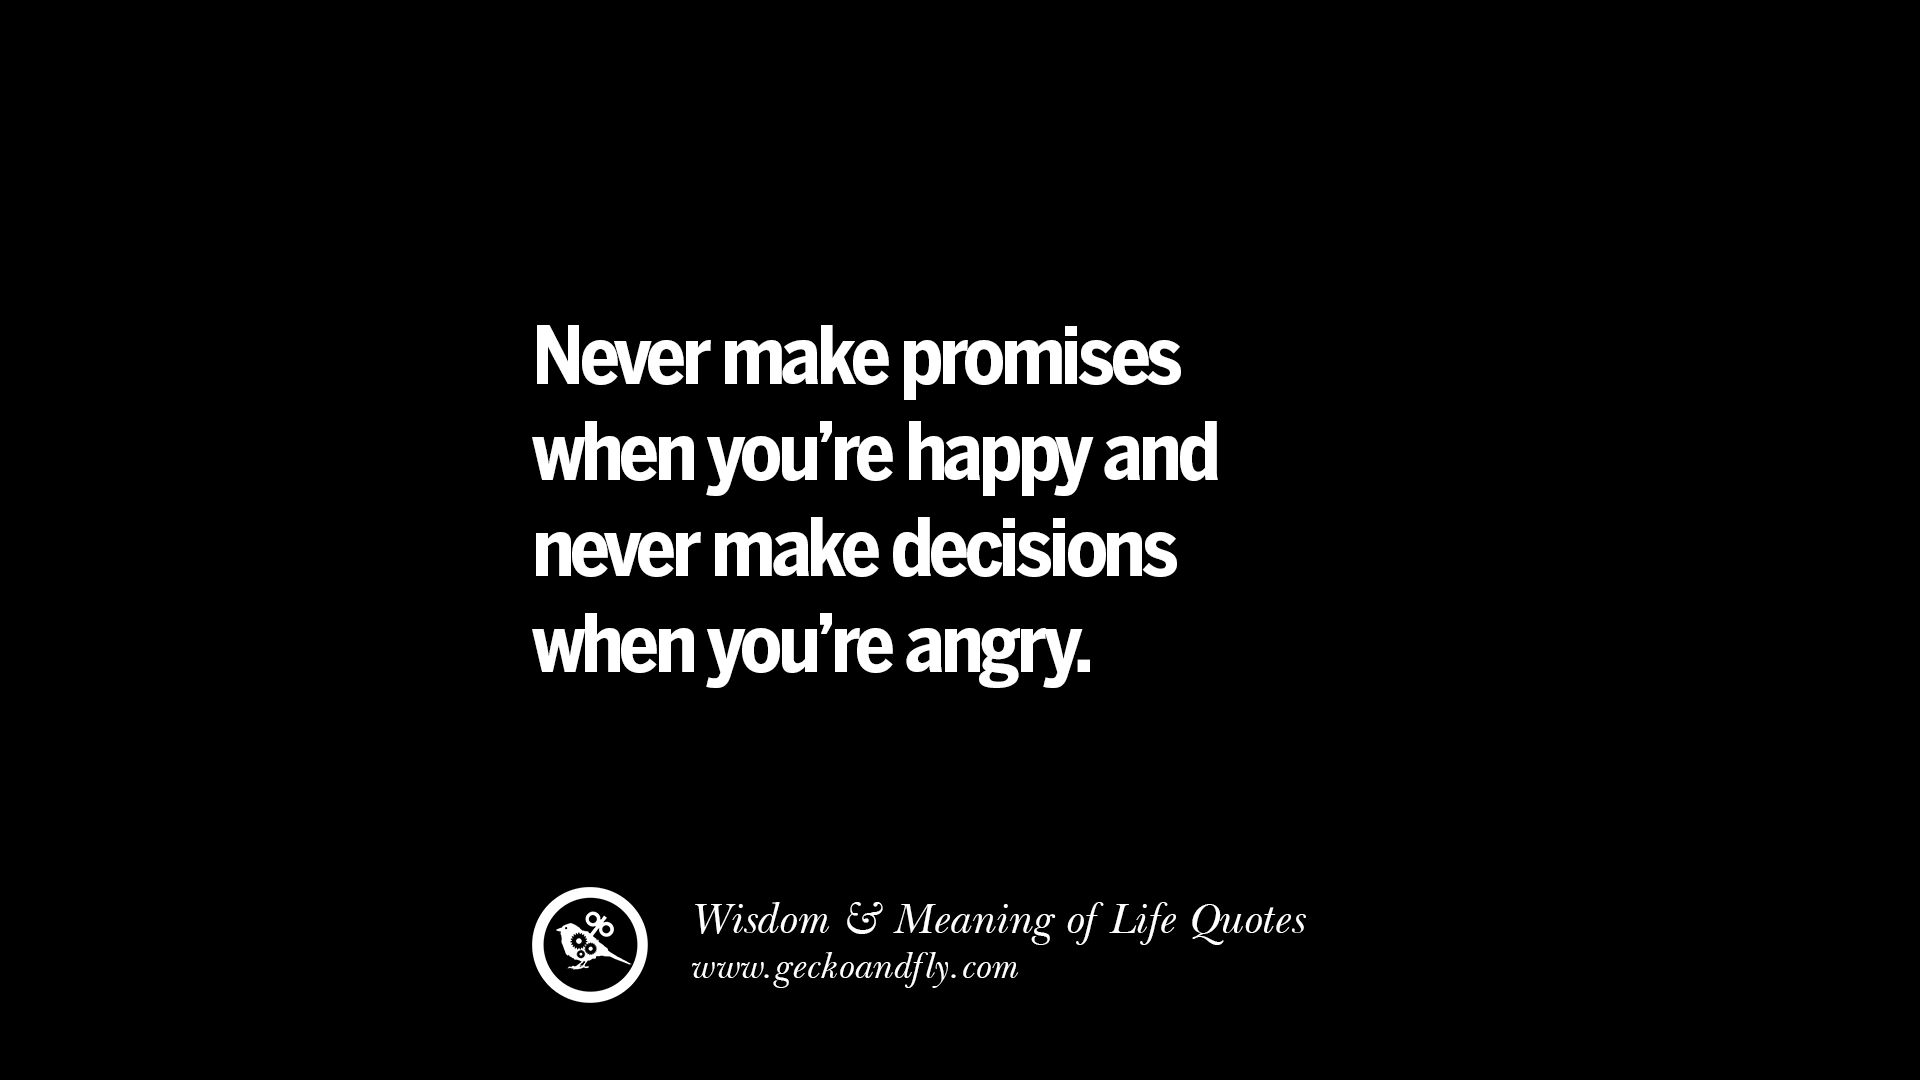 Never make promises when you re happy and never make decisions when you re angry